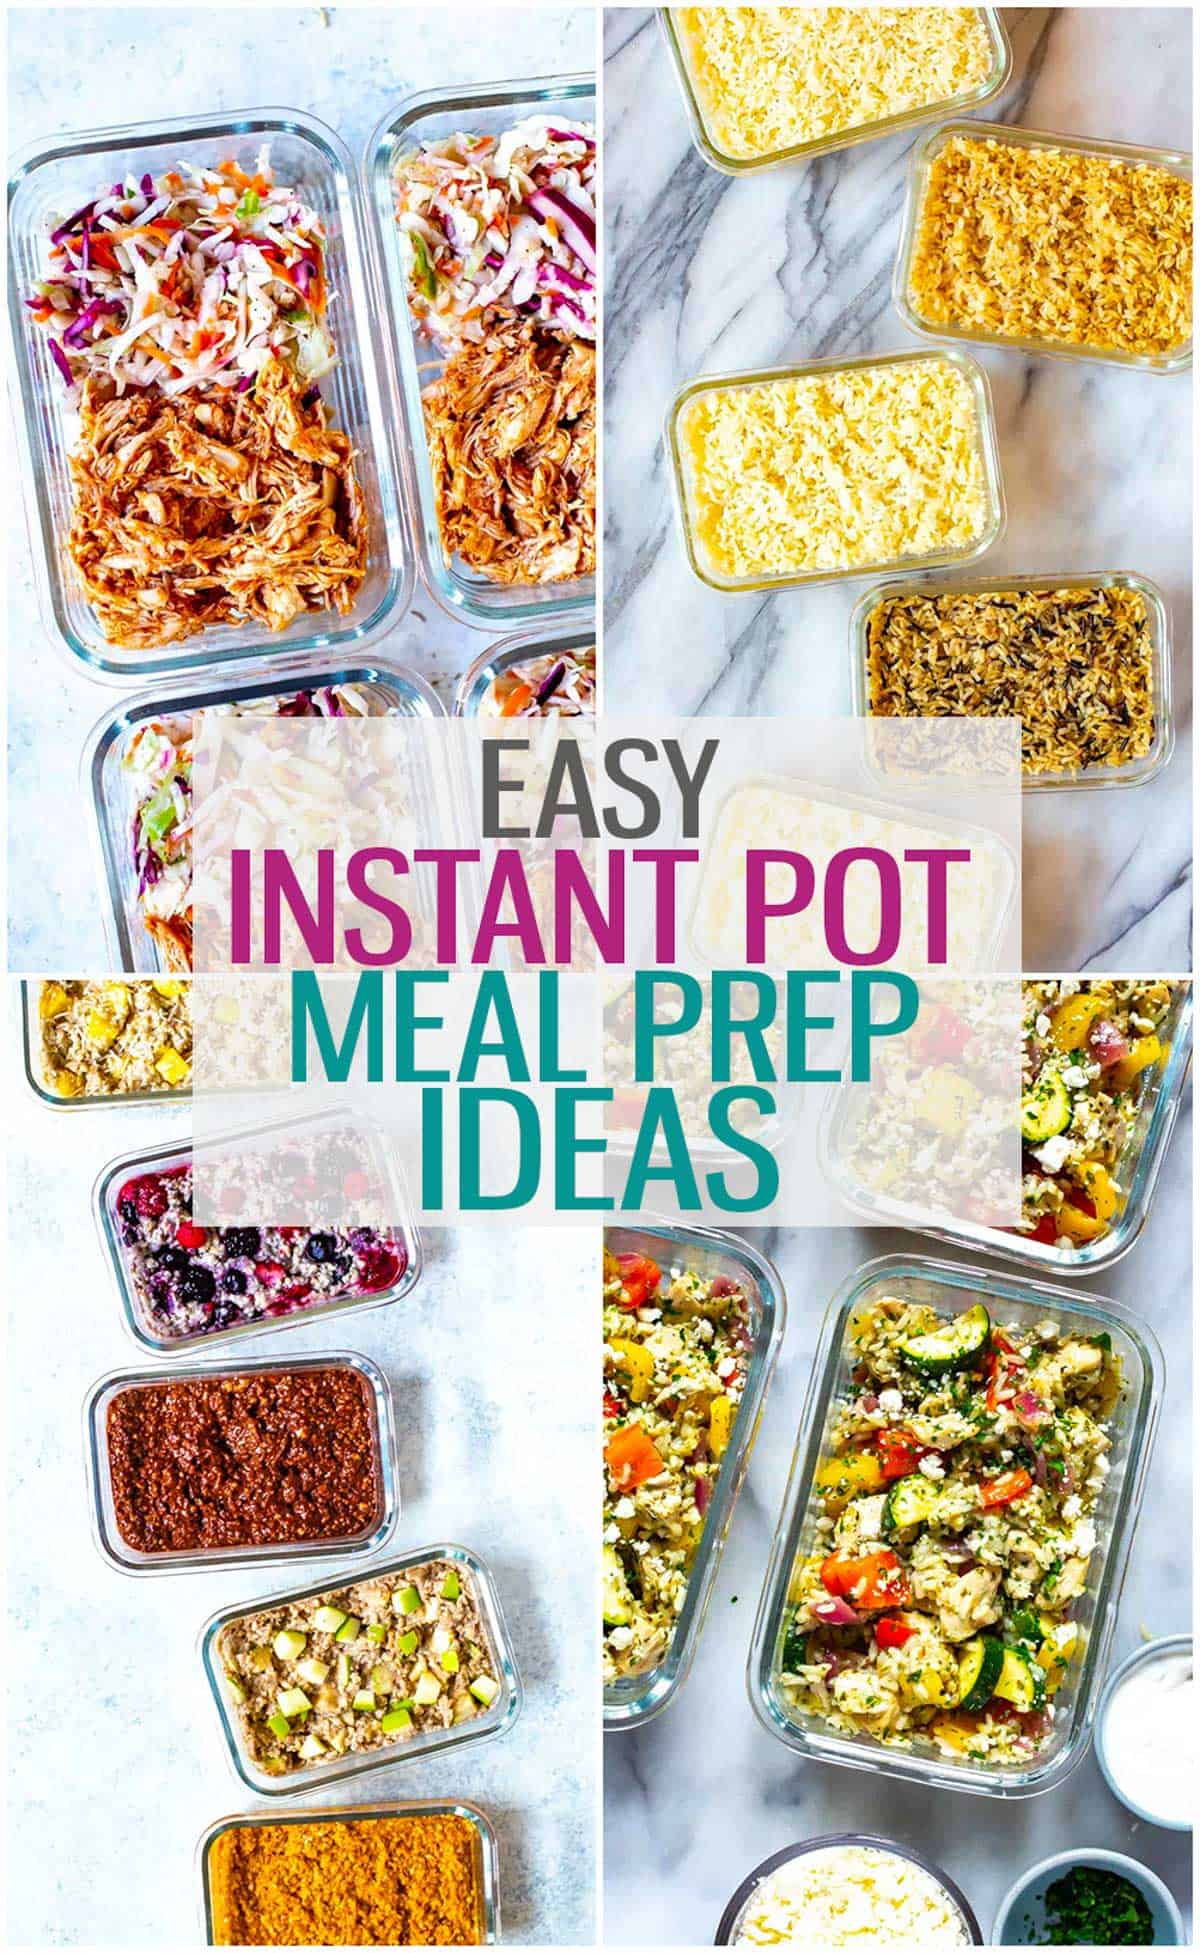 A collage of four different recipes in meal prep containers with the text "Easy Instant Pot Meal Prep Ideas" layered over top.